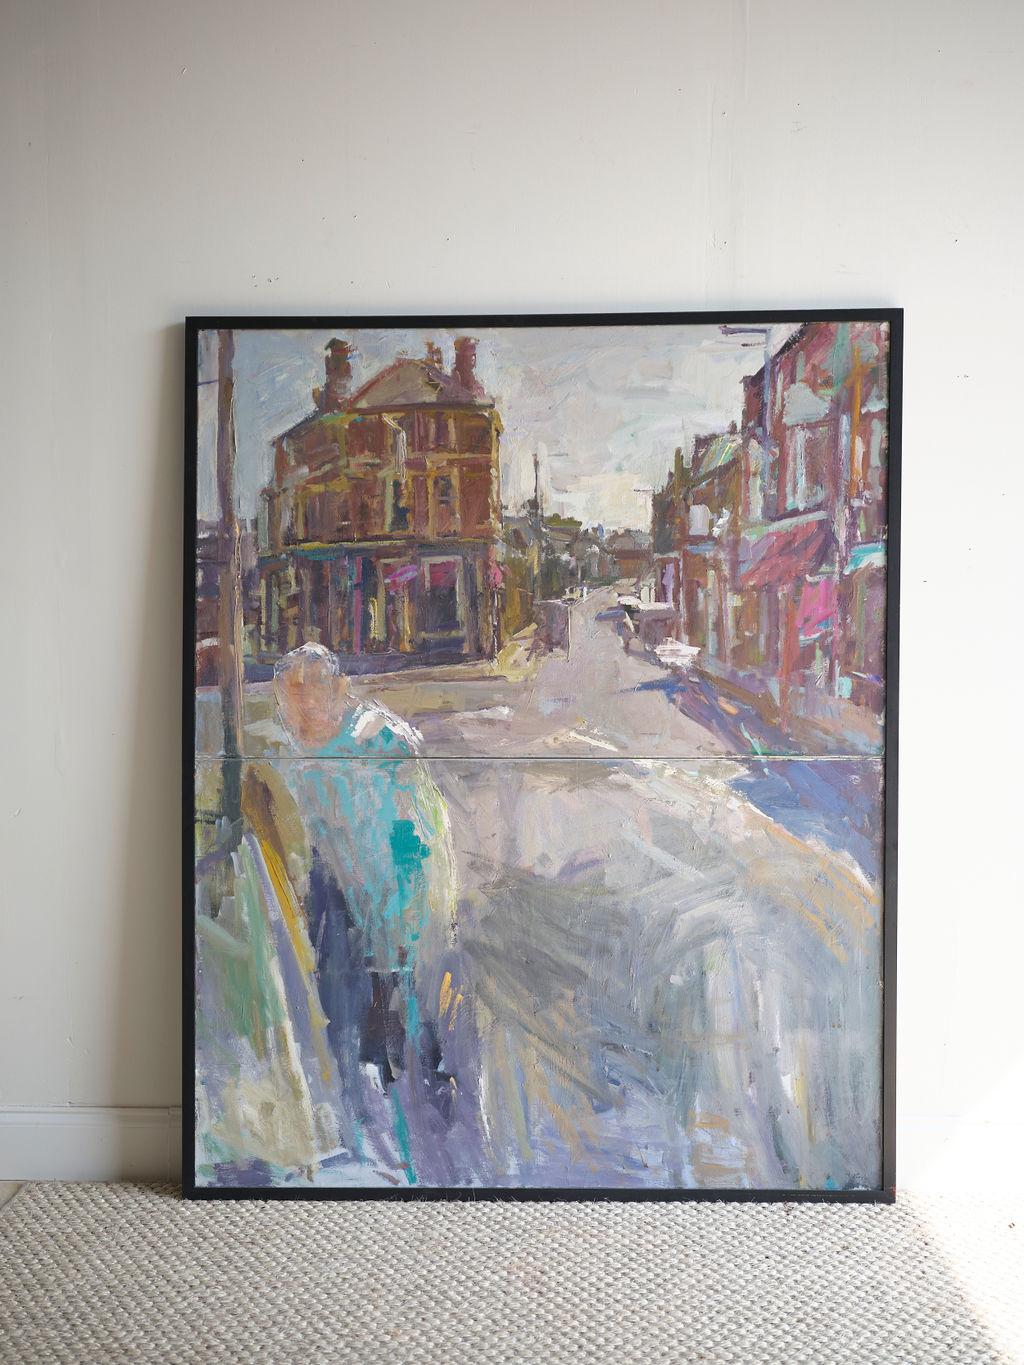 This large abstract oil painting by Andrew Vass was painted in 20th century England. It was painted on two canvases that have been stitched together and framed to make one large canvas. The focus of the painting is on St. Margarets in Twickenham,